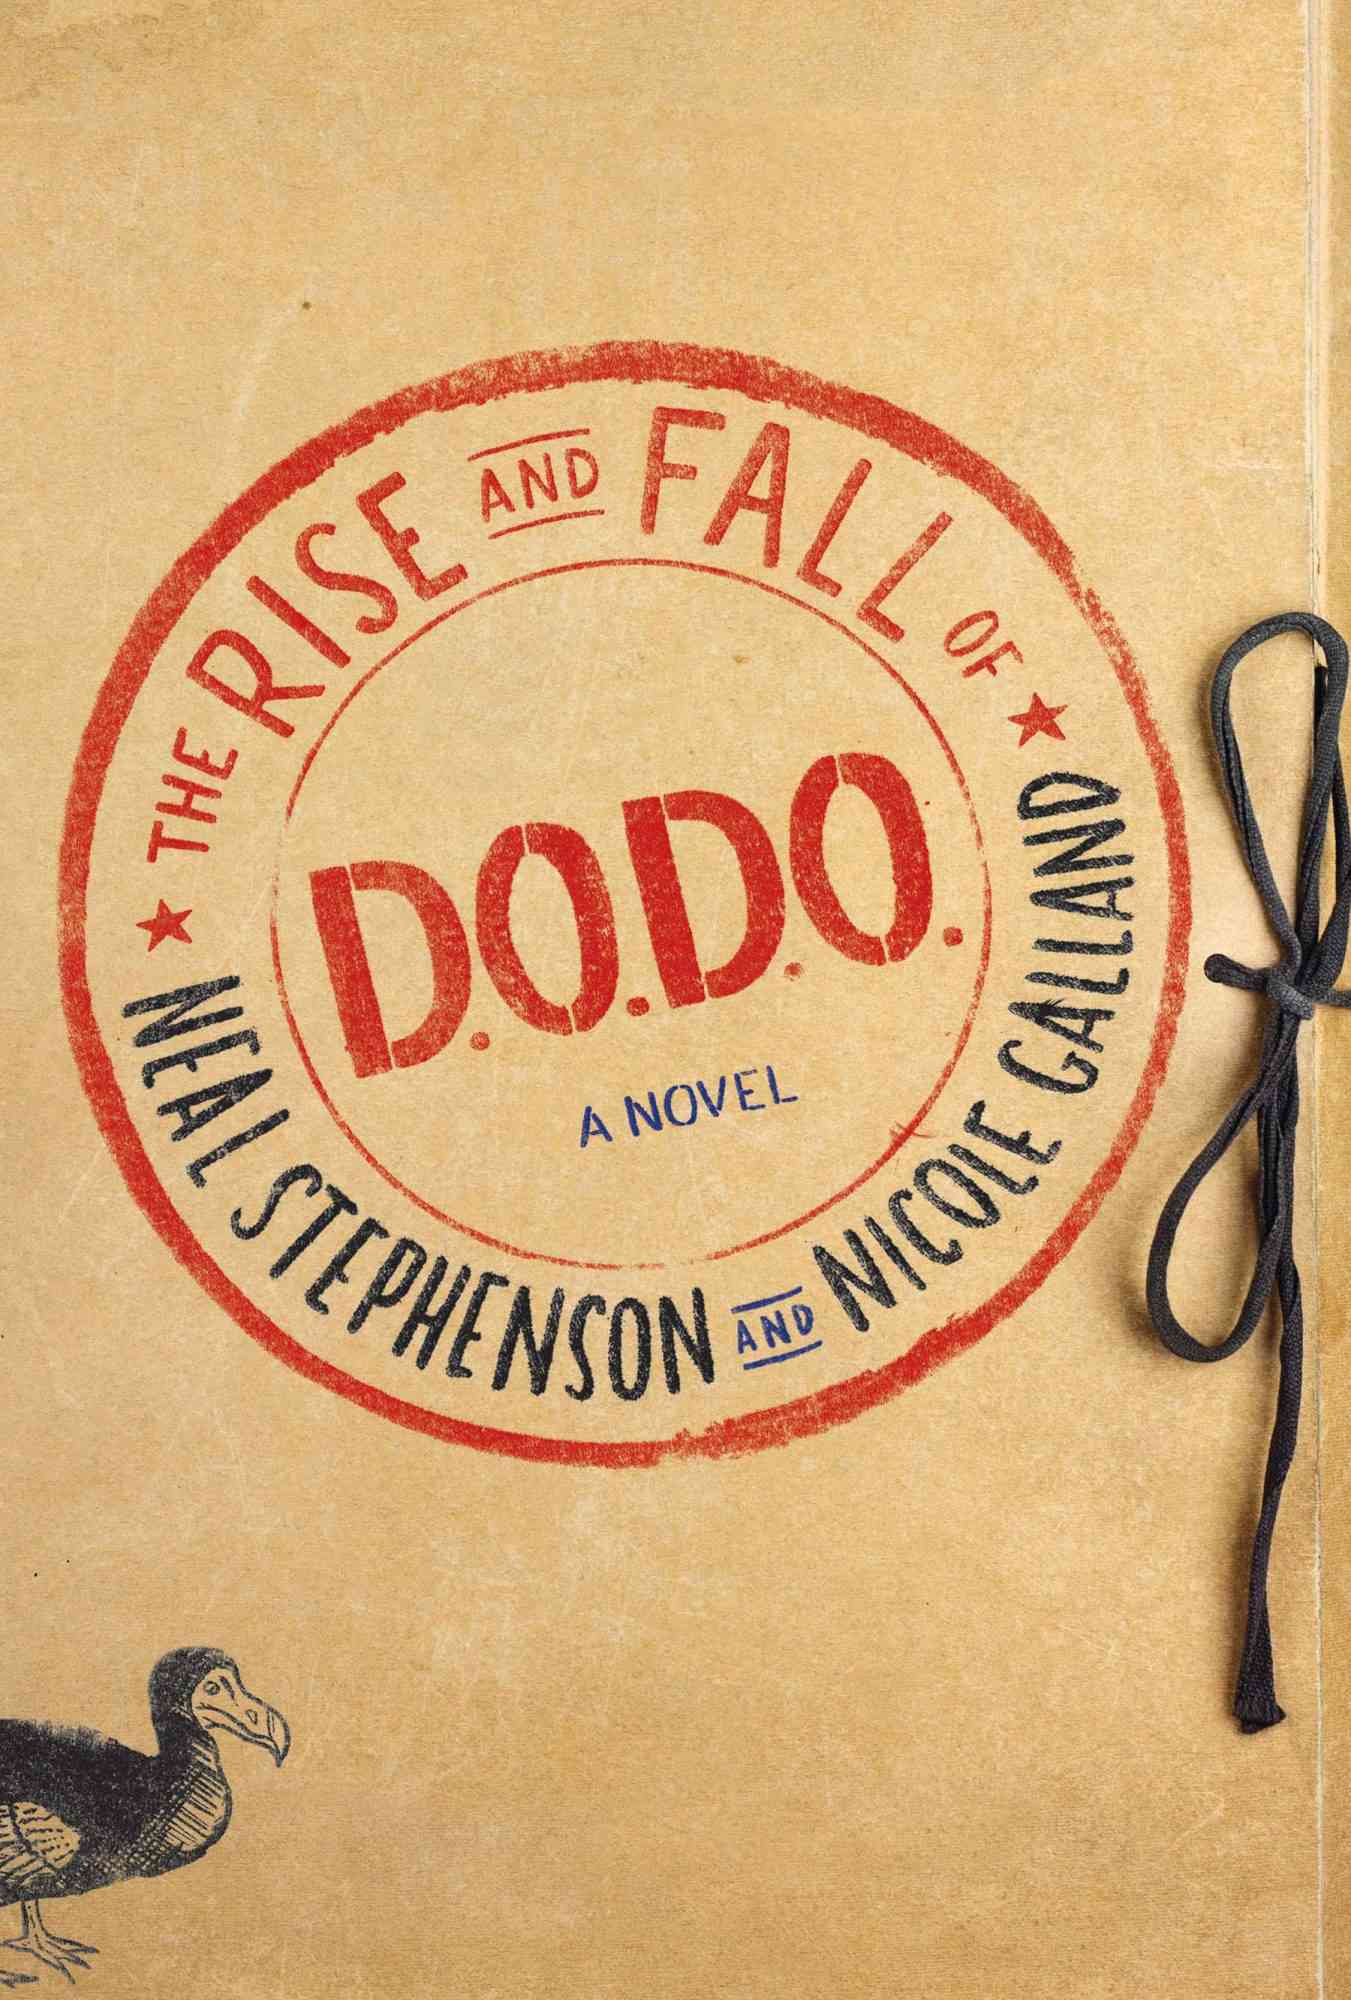 The Rise and Fall of D.O.D.O  (June 13, 2017)by Neal Stephenson